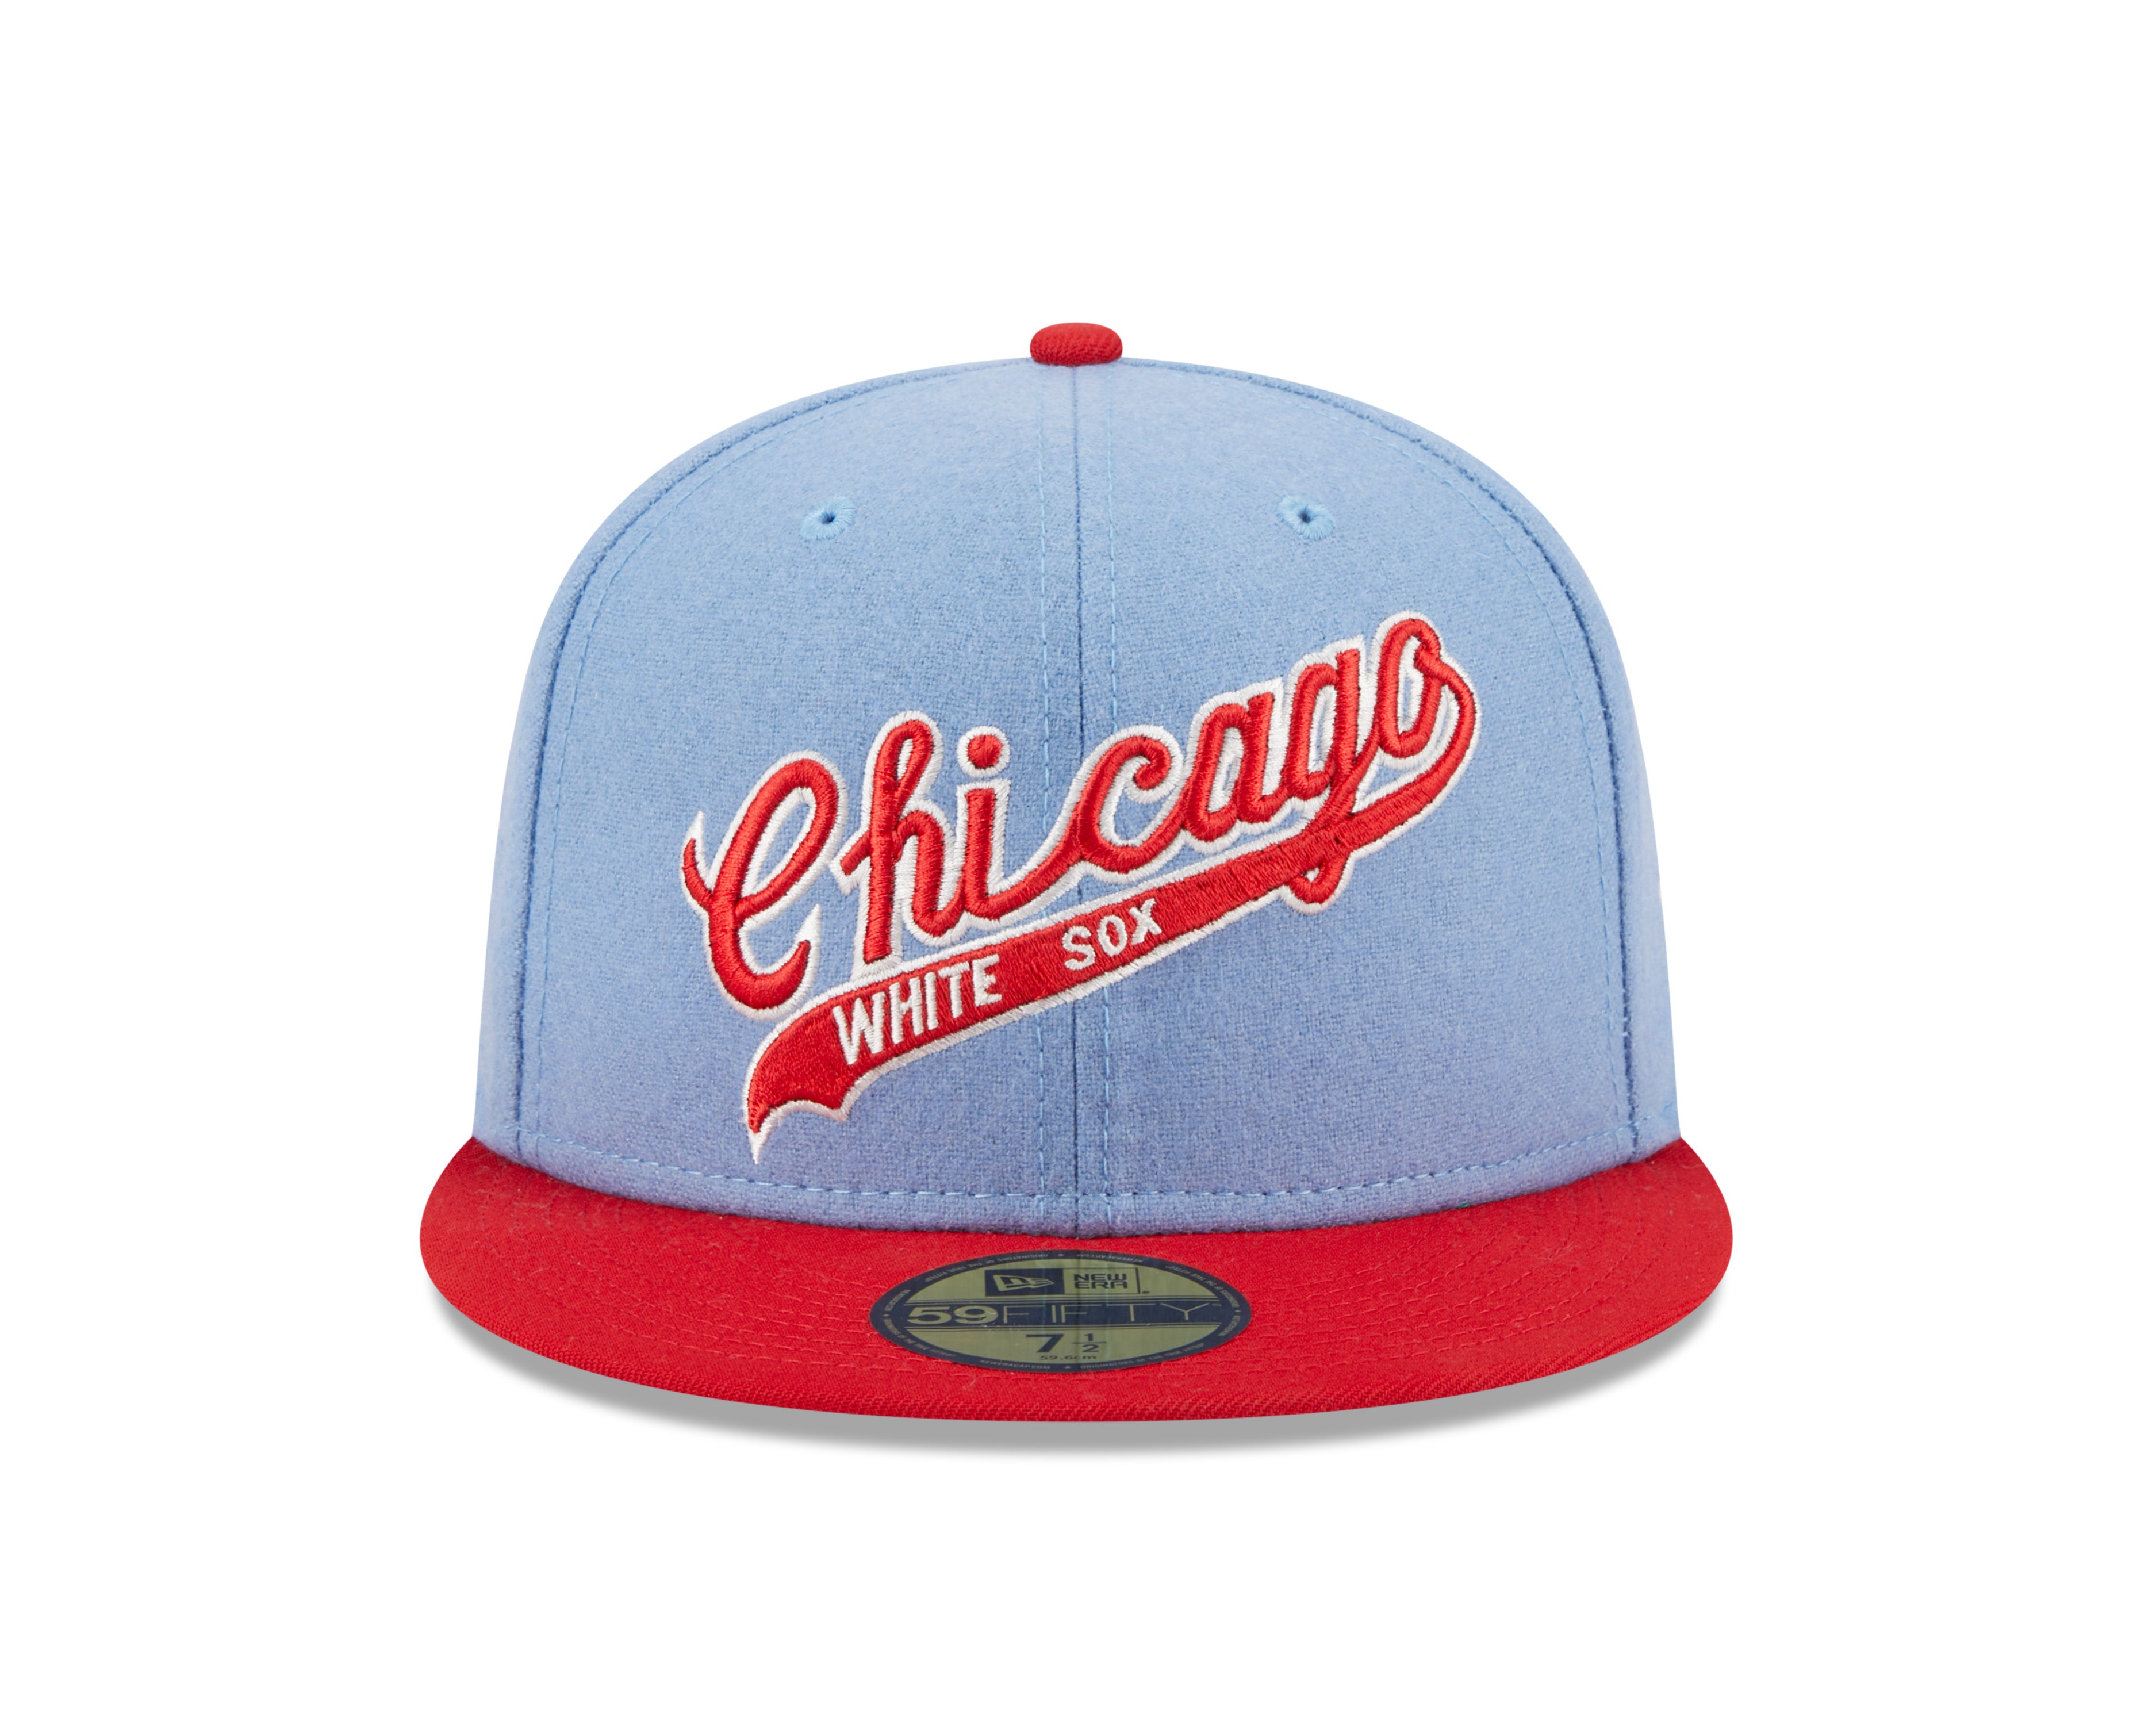 New Era - Chicago White Sox - 59Fifty Fitted - Powder Blues - Sky Blue - Headz Up 